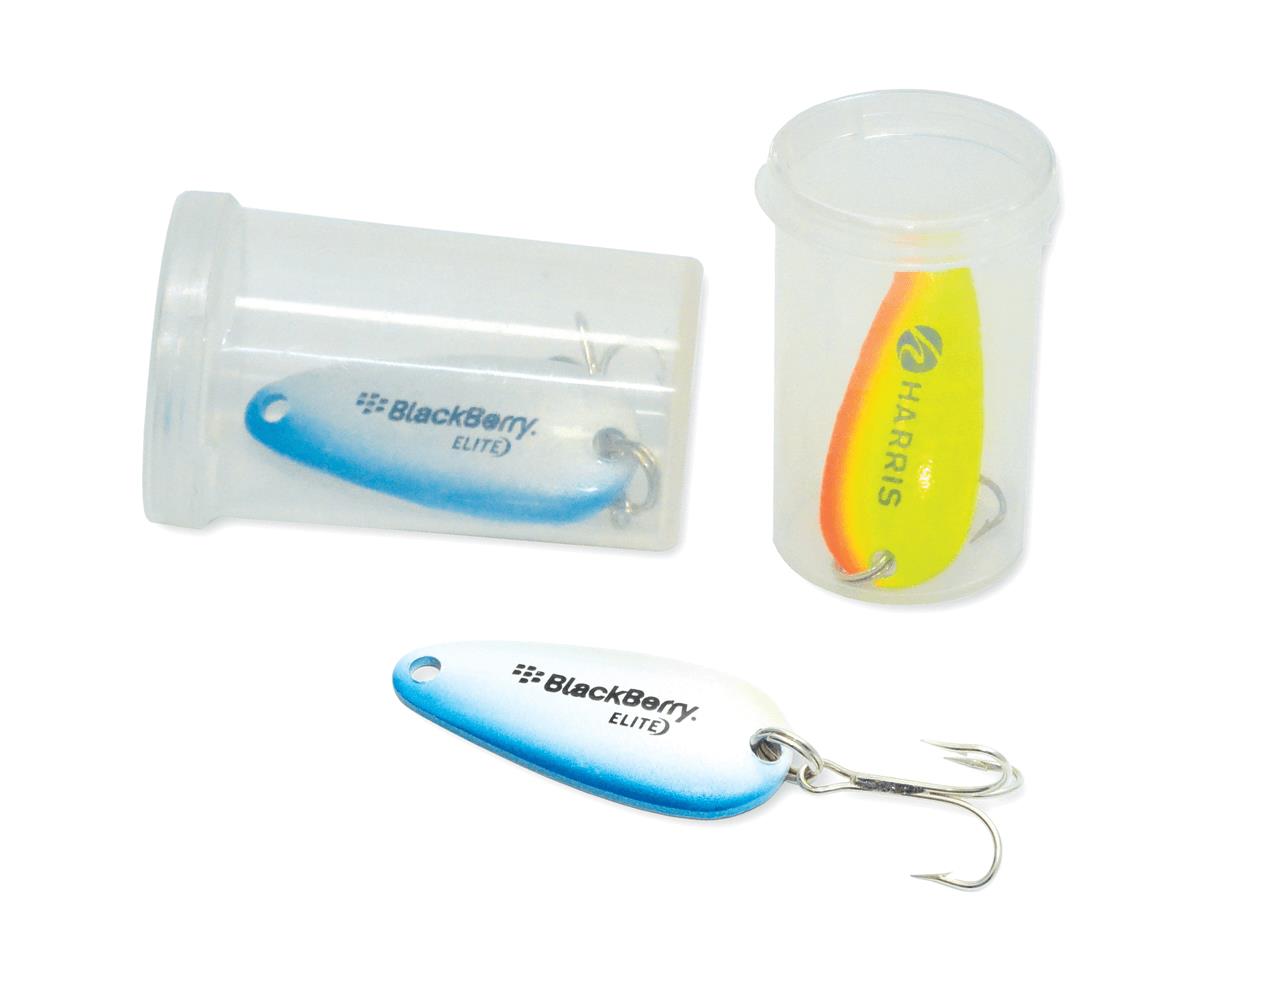 Lucky Strike Mini Lure in a Tube - Just Direct Promotions